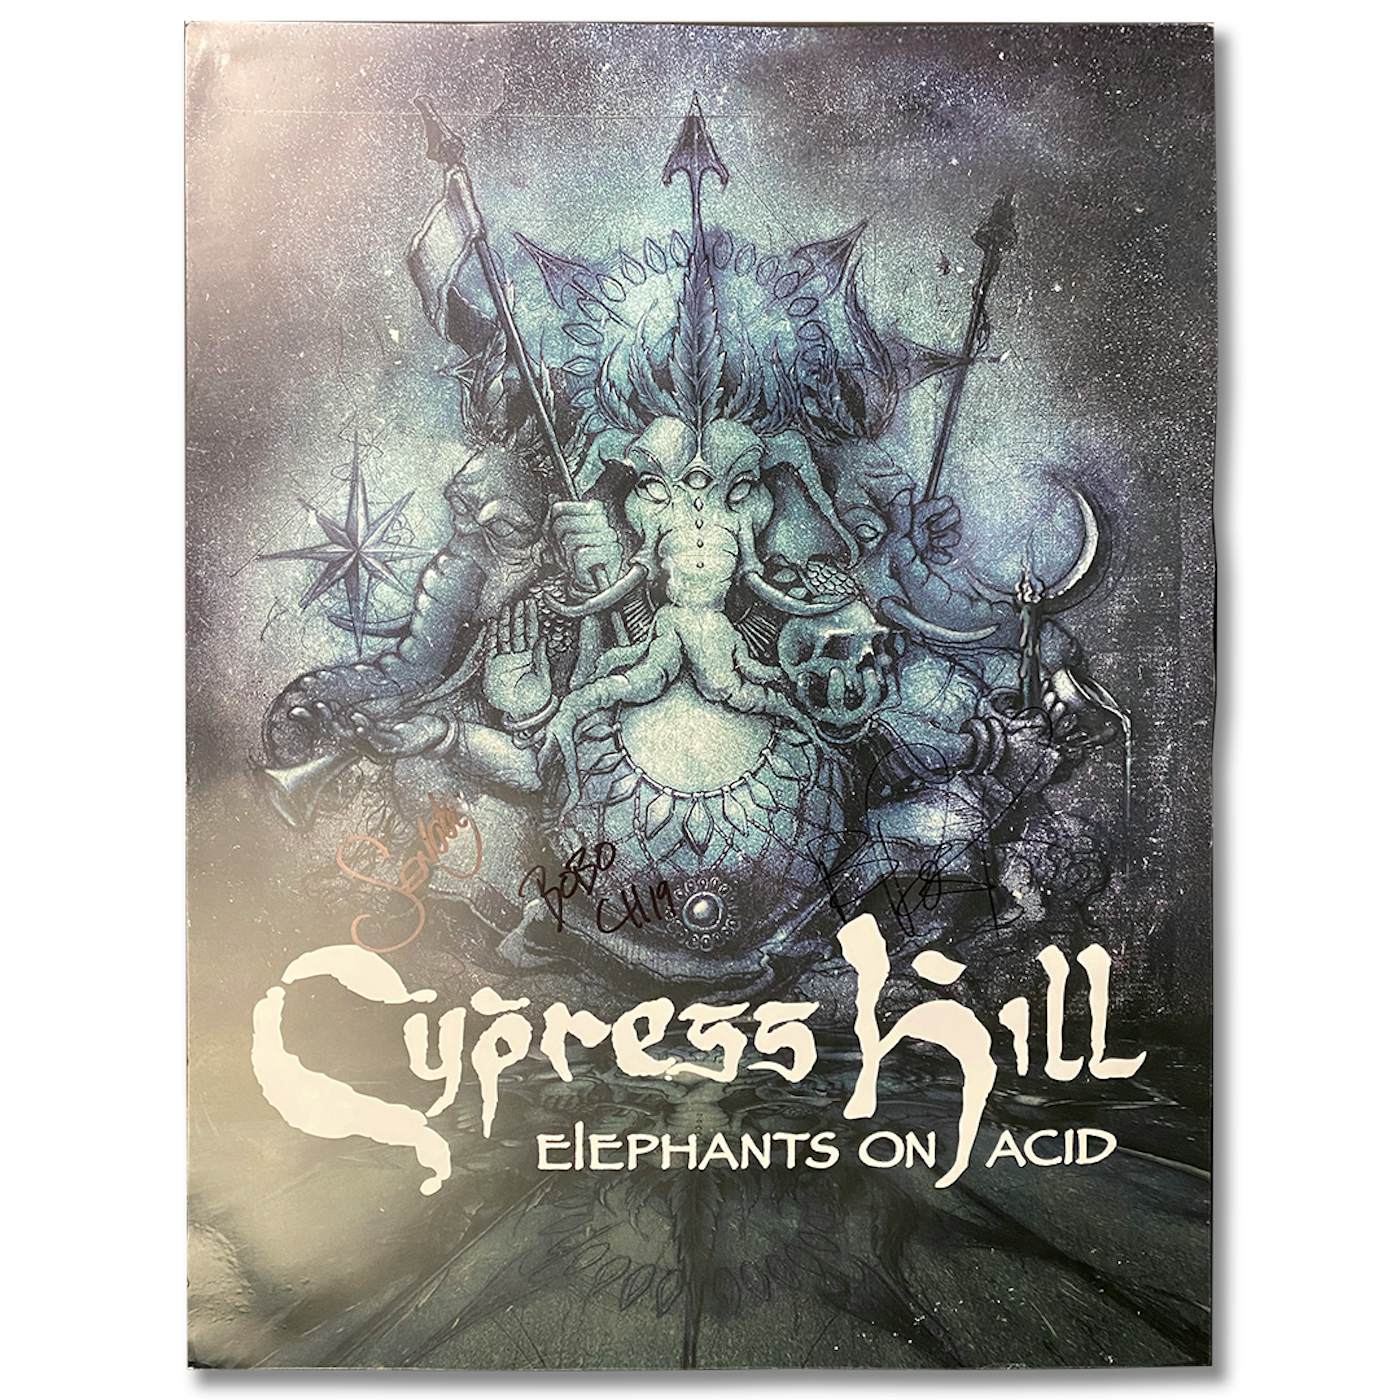 Cypress Hill "Elephants Acid" Autographed Limited Edition Poster